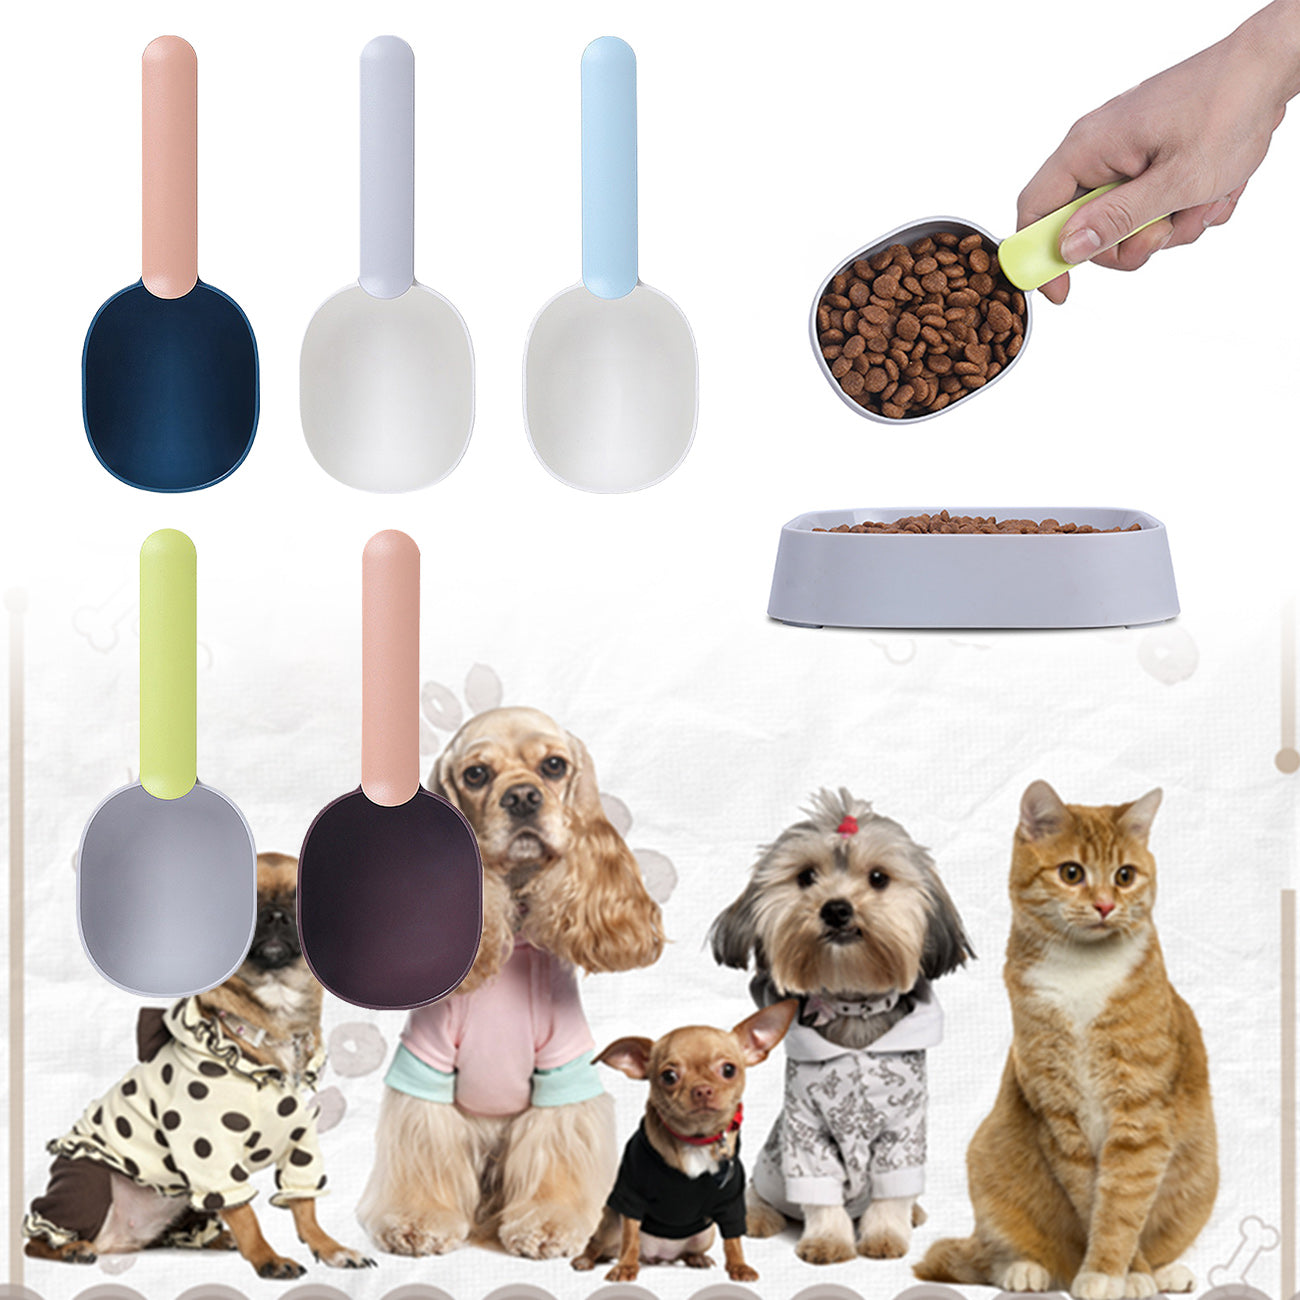 Pet Food Scoop With Ergonomic Bag Clip Handle For Cats Puppies And Small Dogs Measuring Scoop Dog Food Scoop, Plastic Measuring Cup Pet Food Feeding 1 Cup Spoon Long Handle With Clip For Dogs Cats